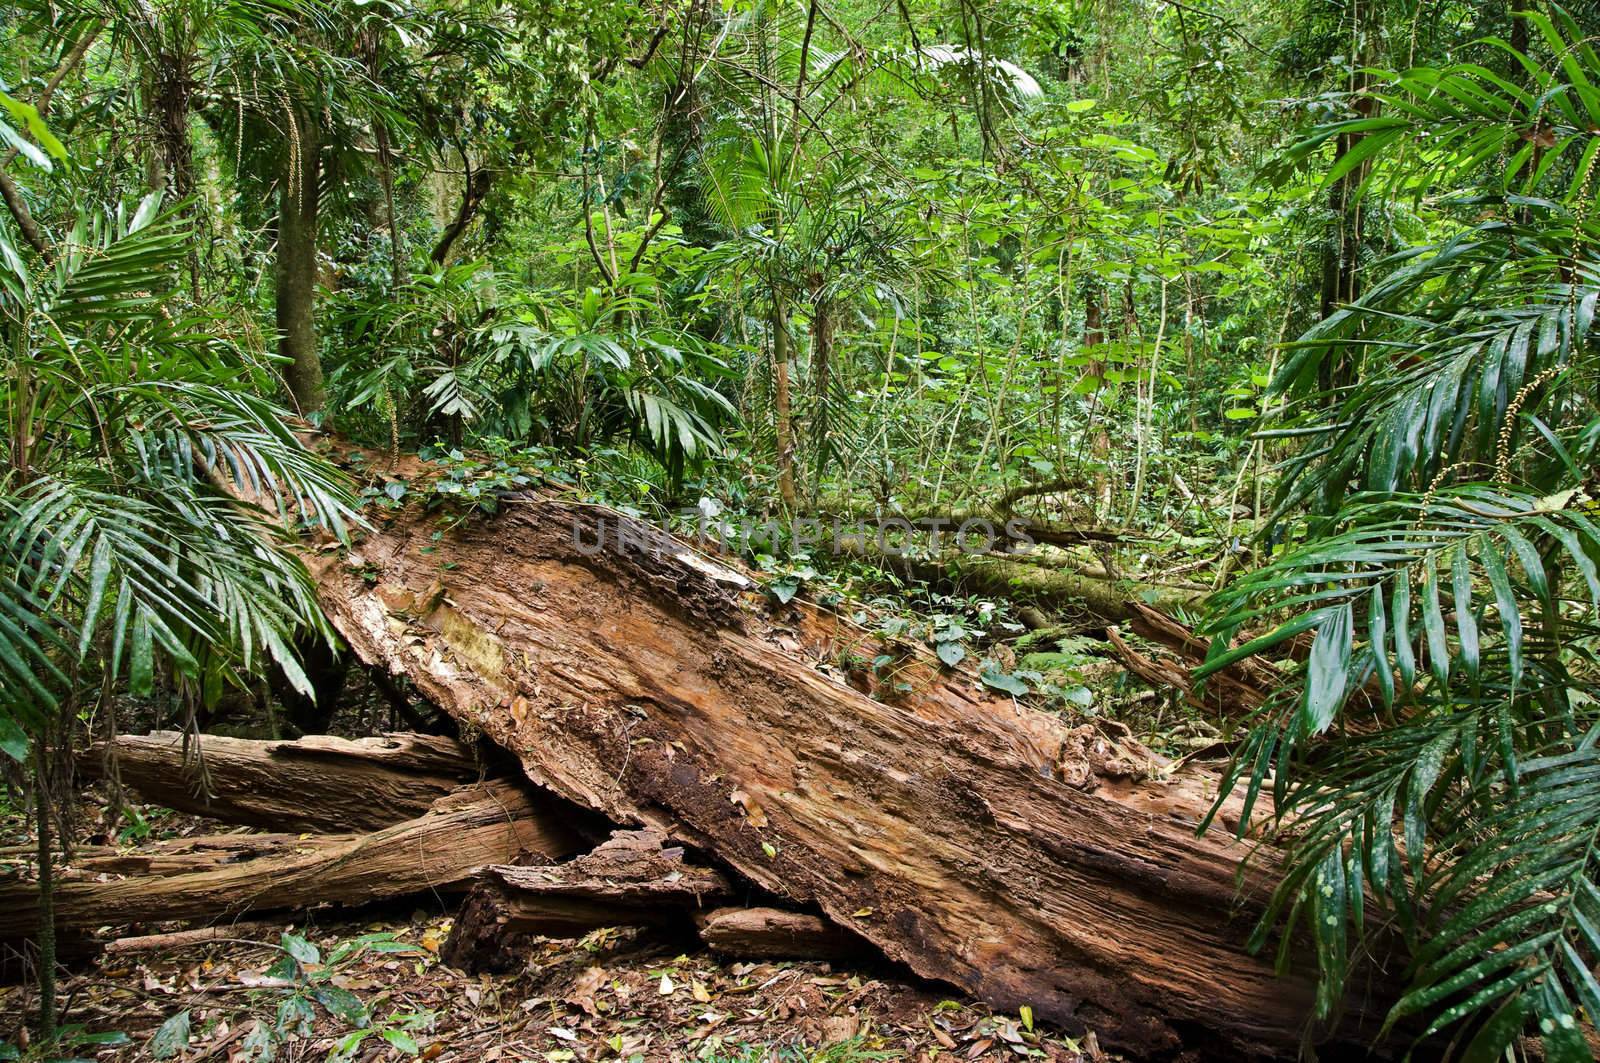 great image ofa fallen log in the rain forest